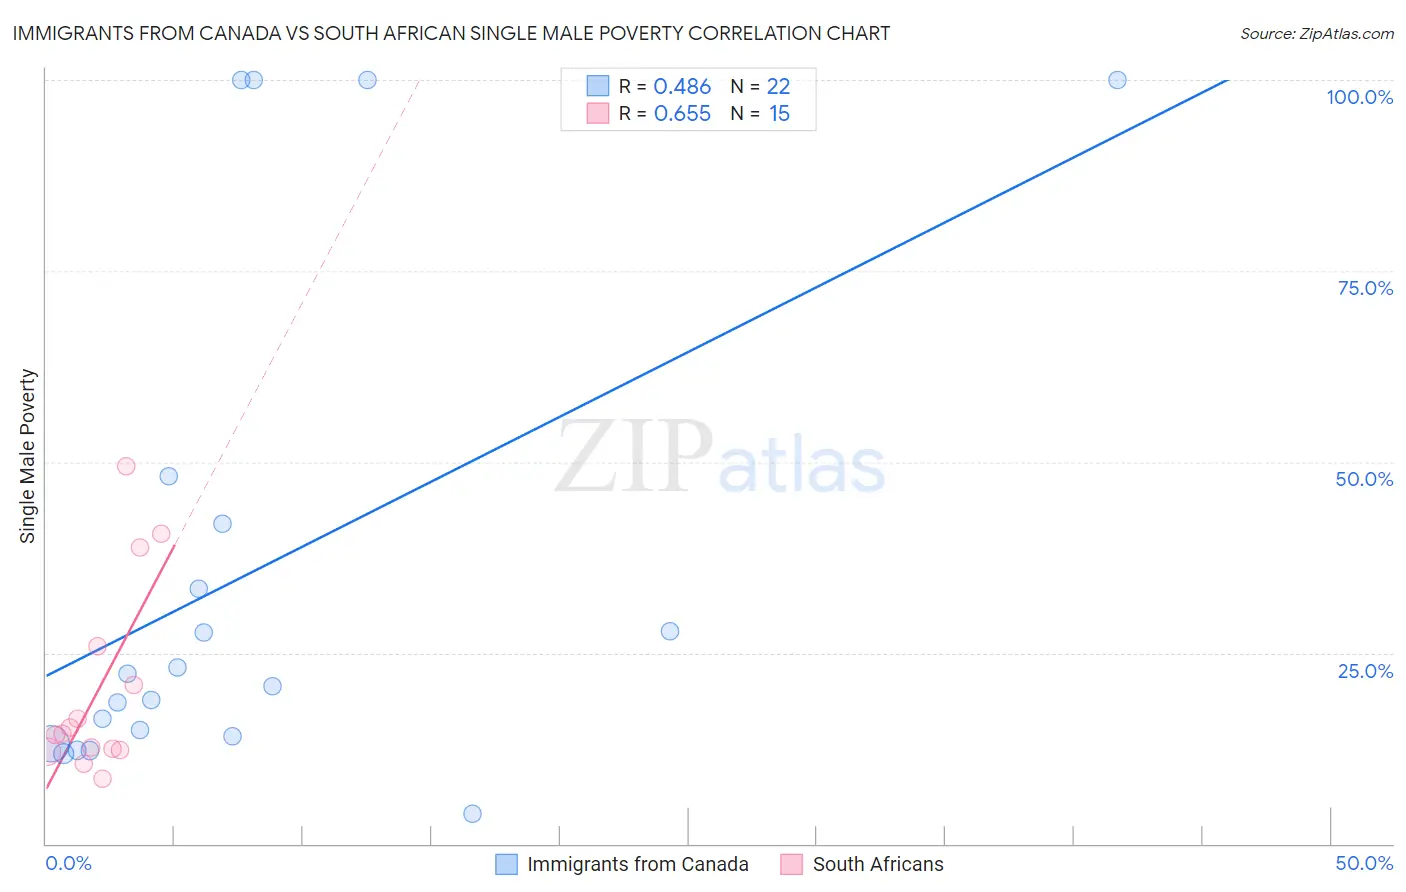 Immigrants from Canada vs South African Single Male Poverty